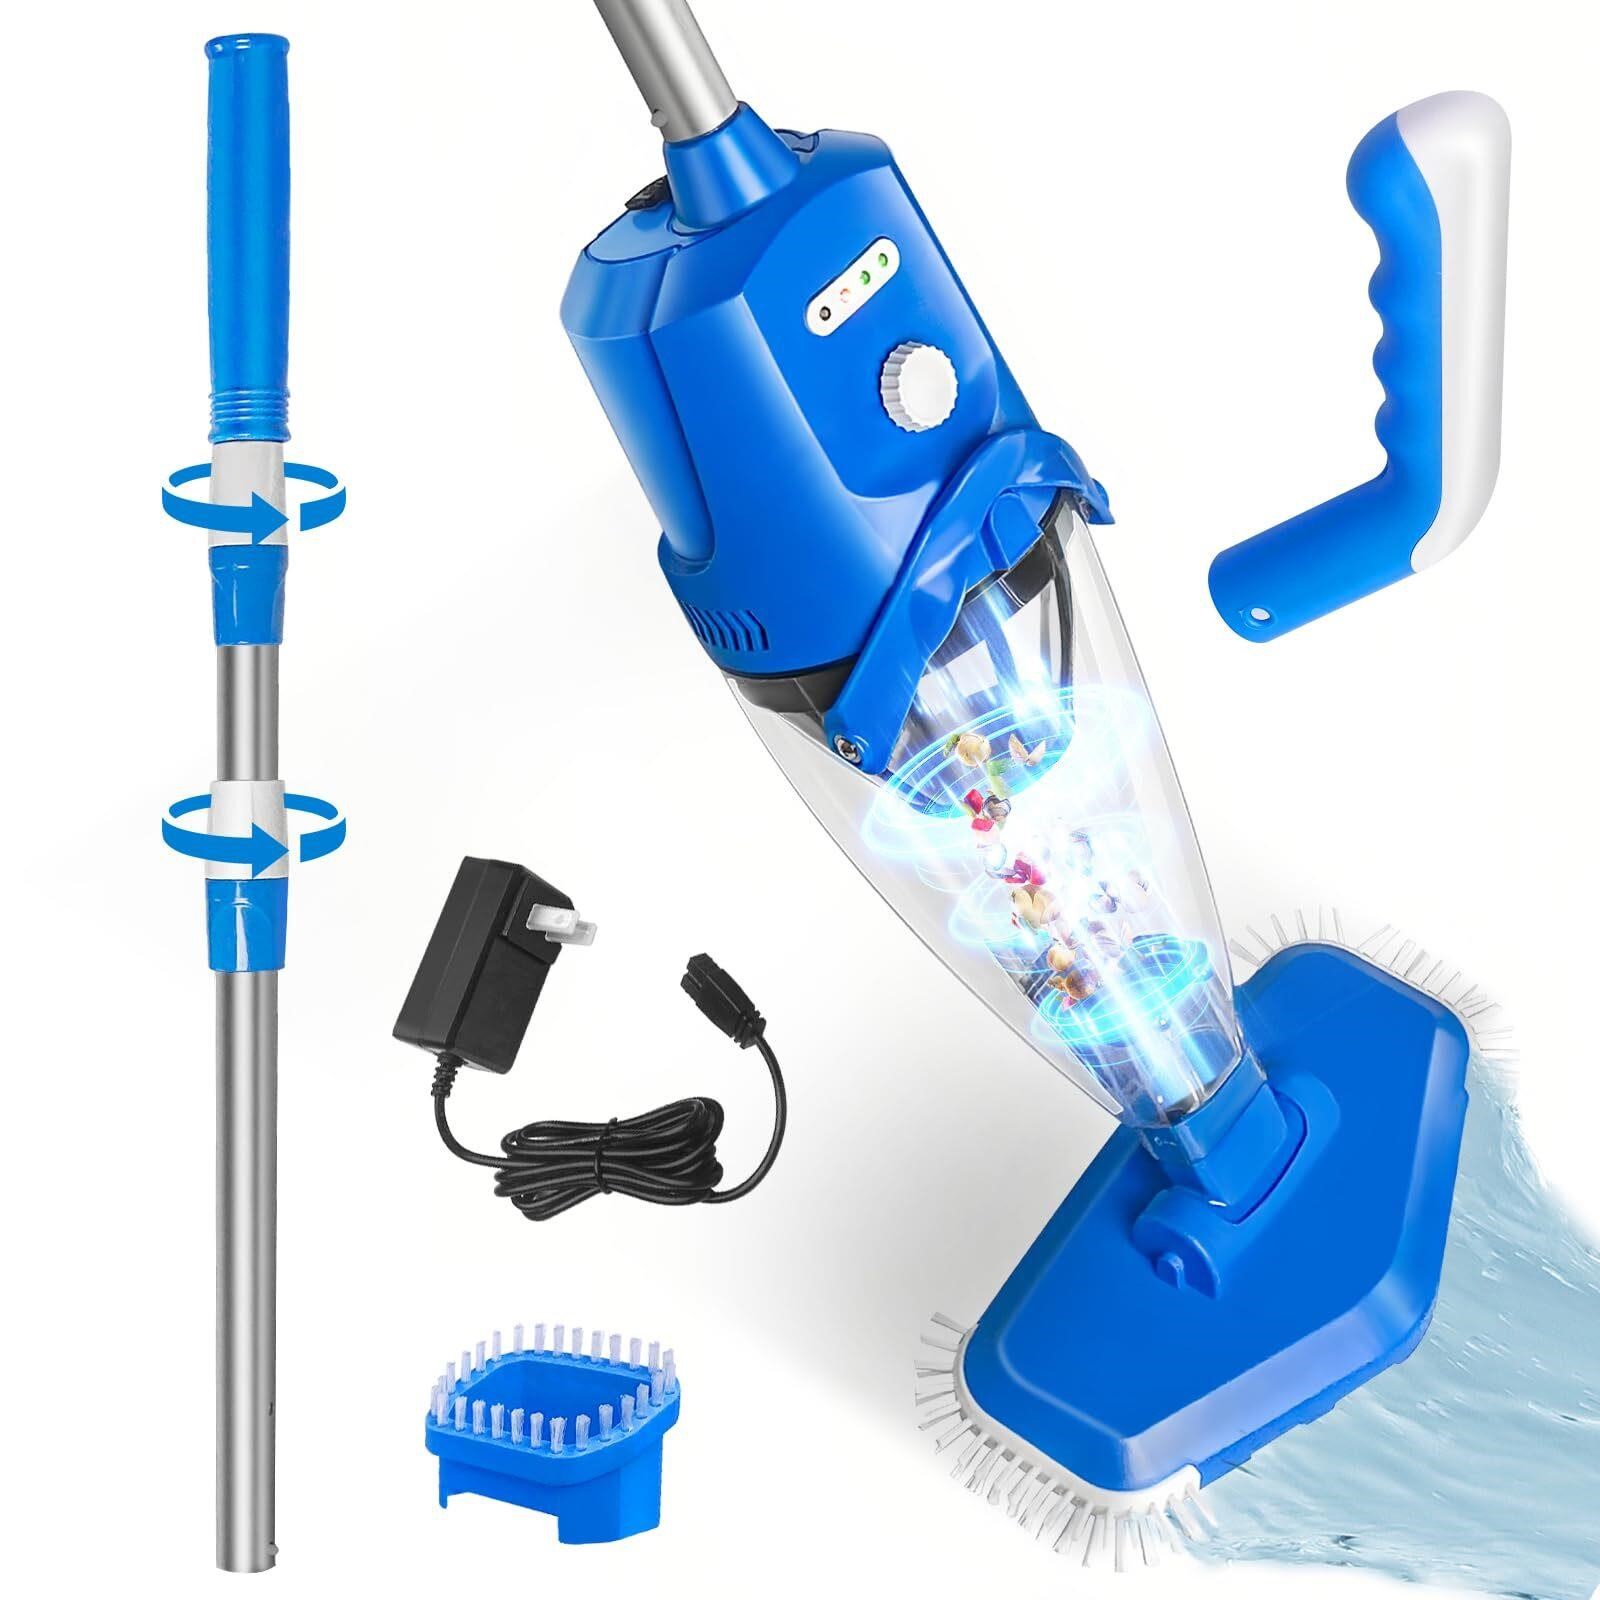 YSMJ Max Power Handheld Rechargeable Pool Cleaner